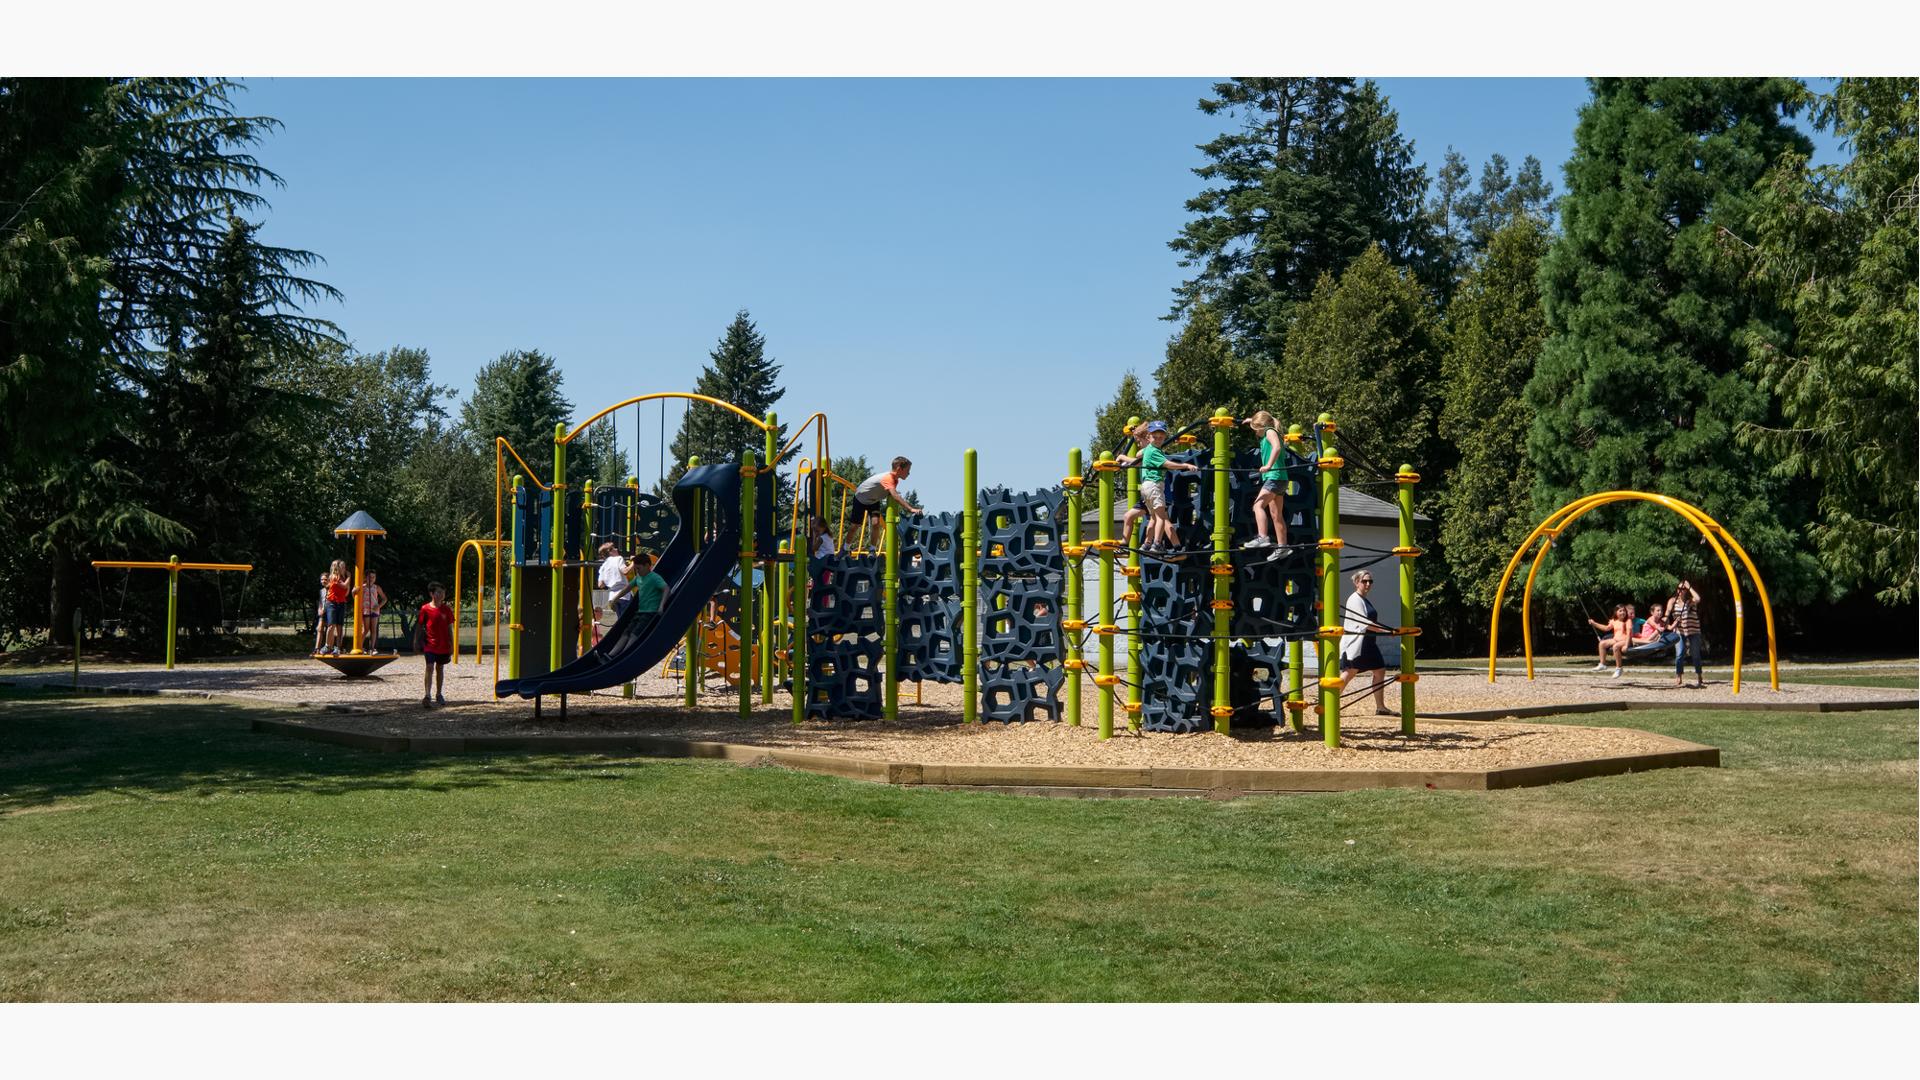 Lots of kids playing on a playground with navy blue geometric climbers and slides. Kids swinging in the background in amongst tall green pine trees. 